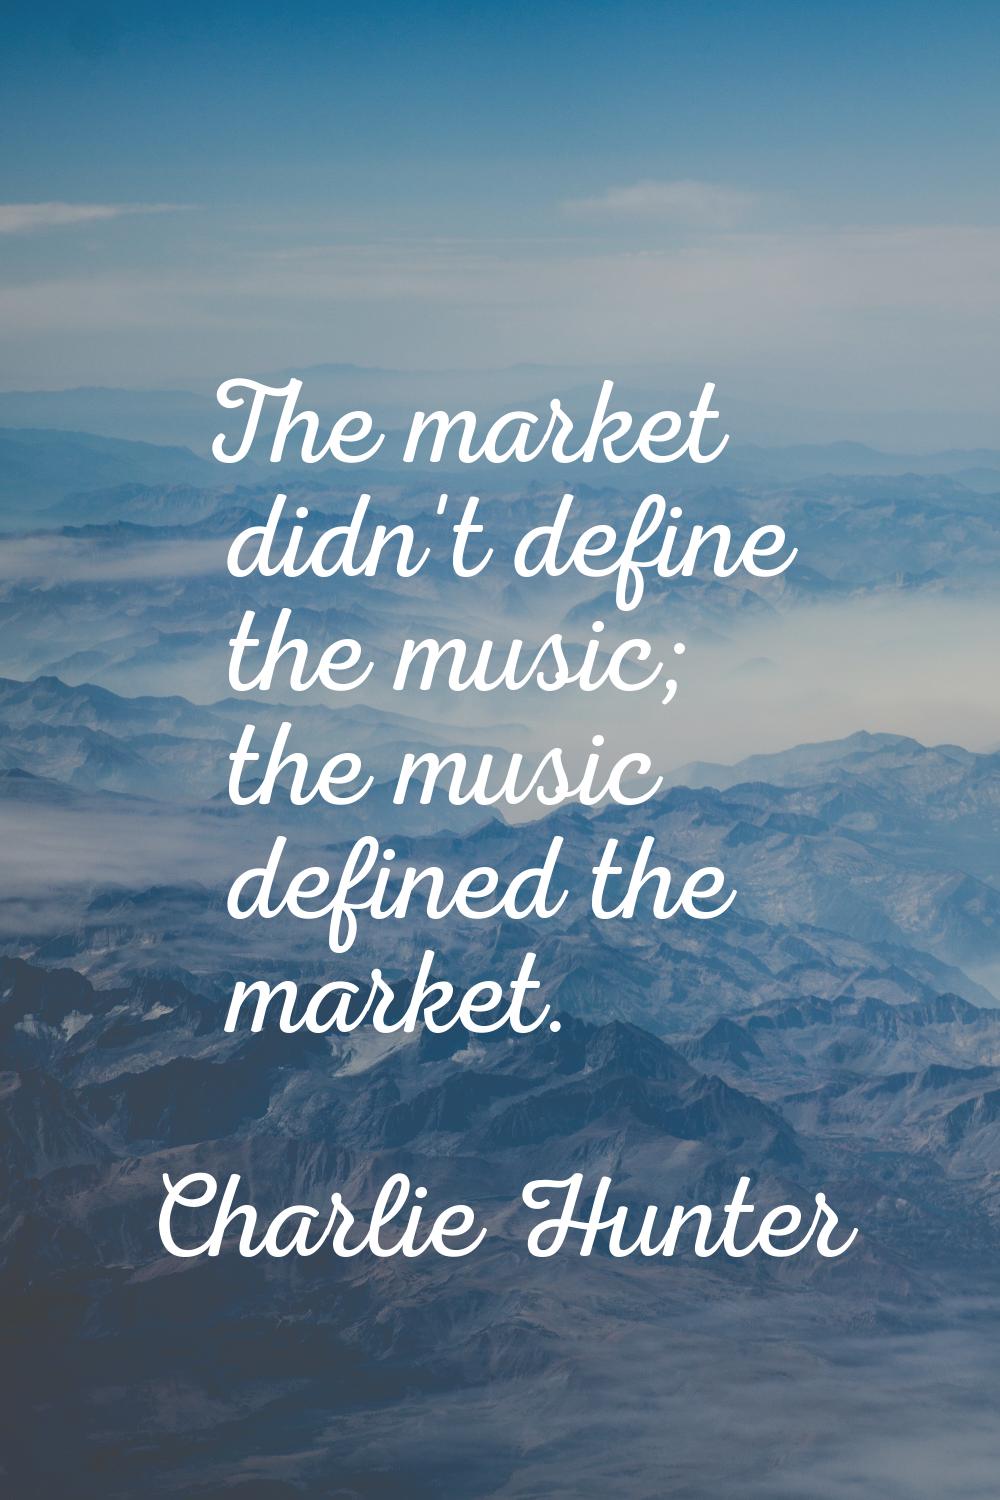 The market didn't define the music; the music defined the market.